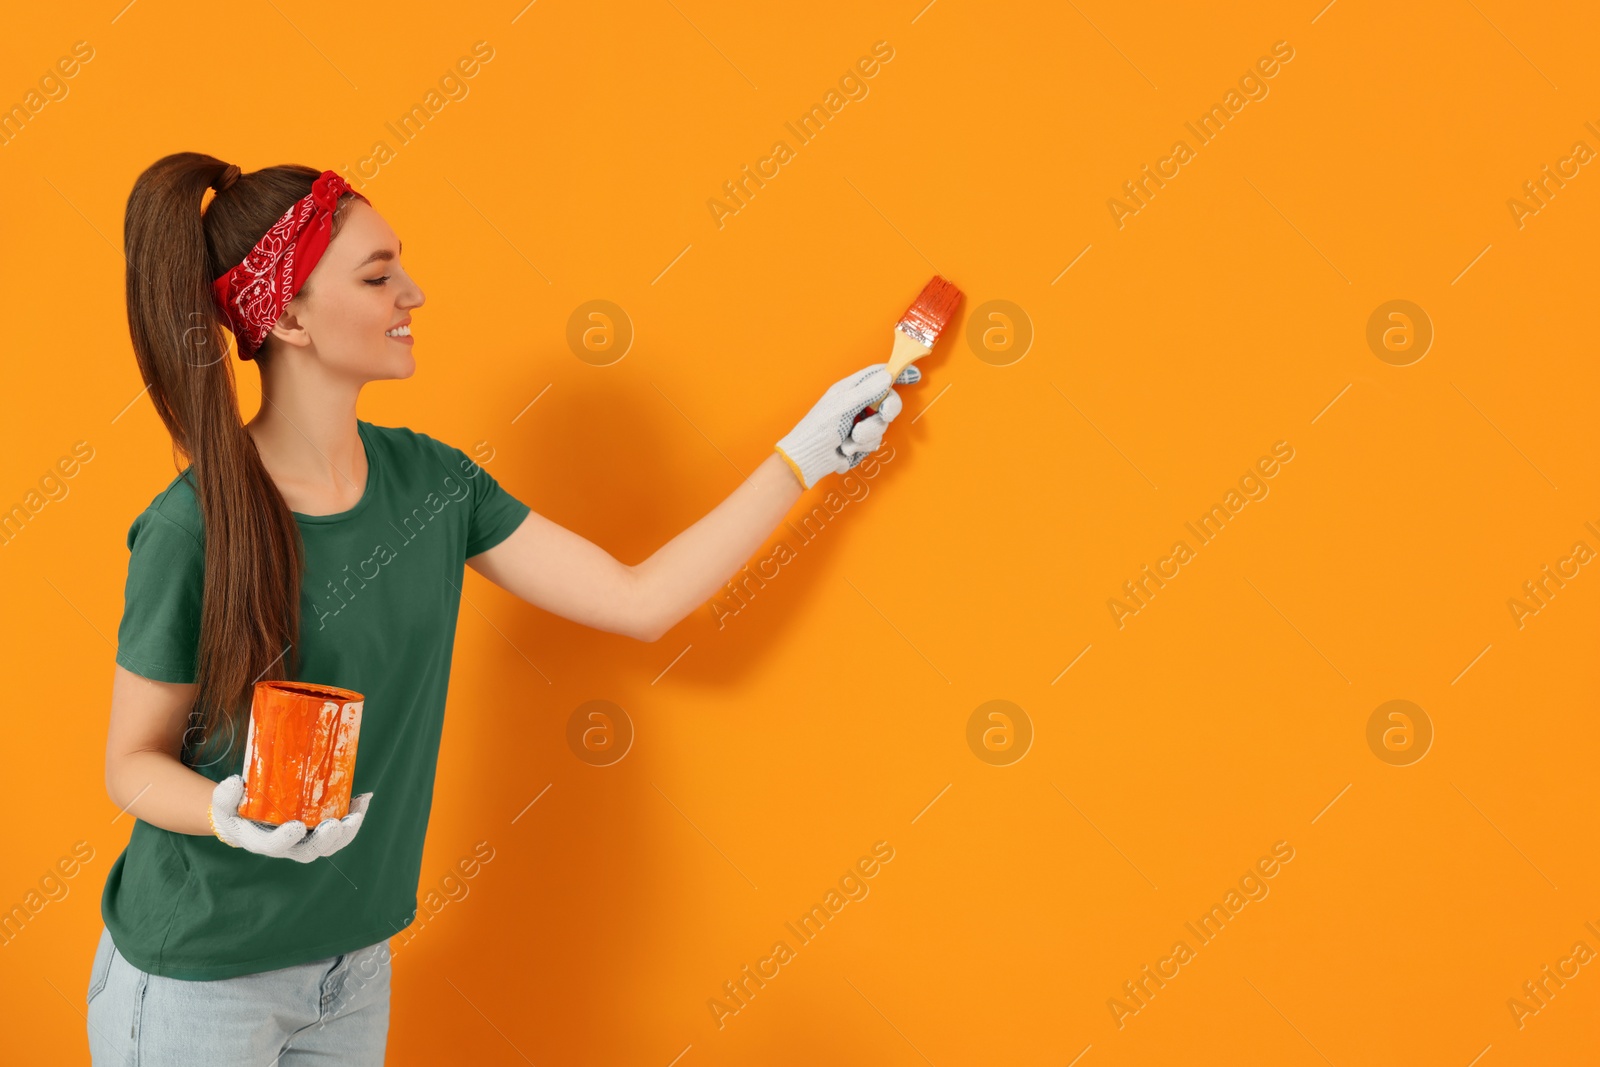 Photo of Designer painting orange wall with brush, space for text